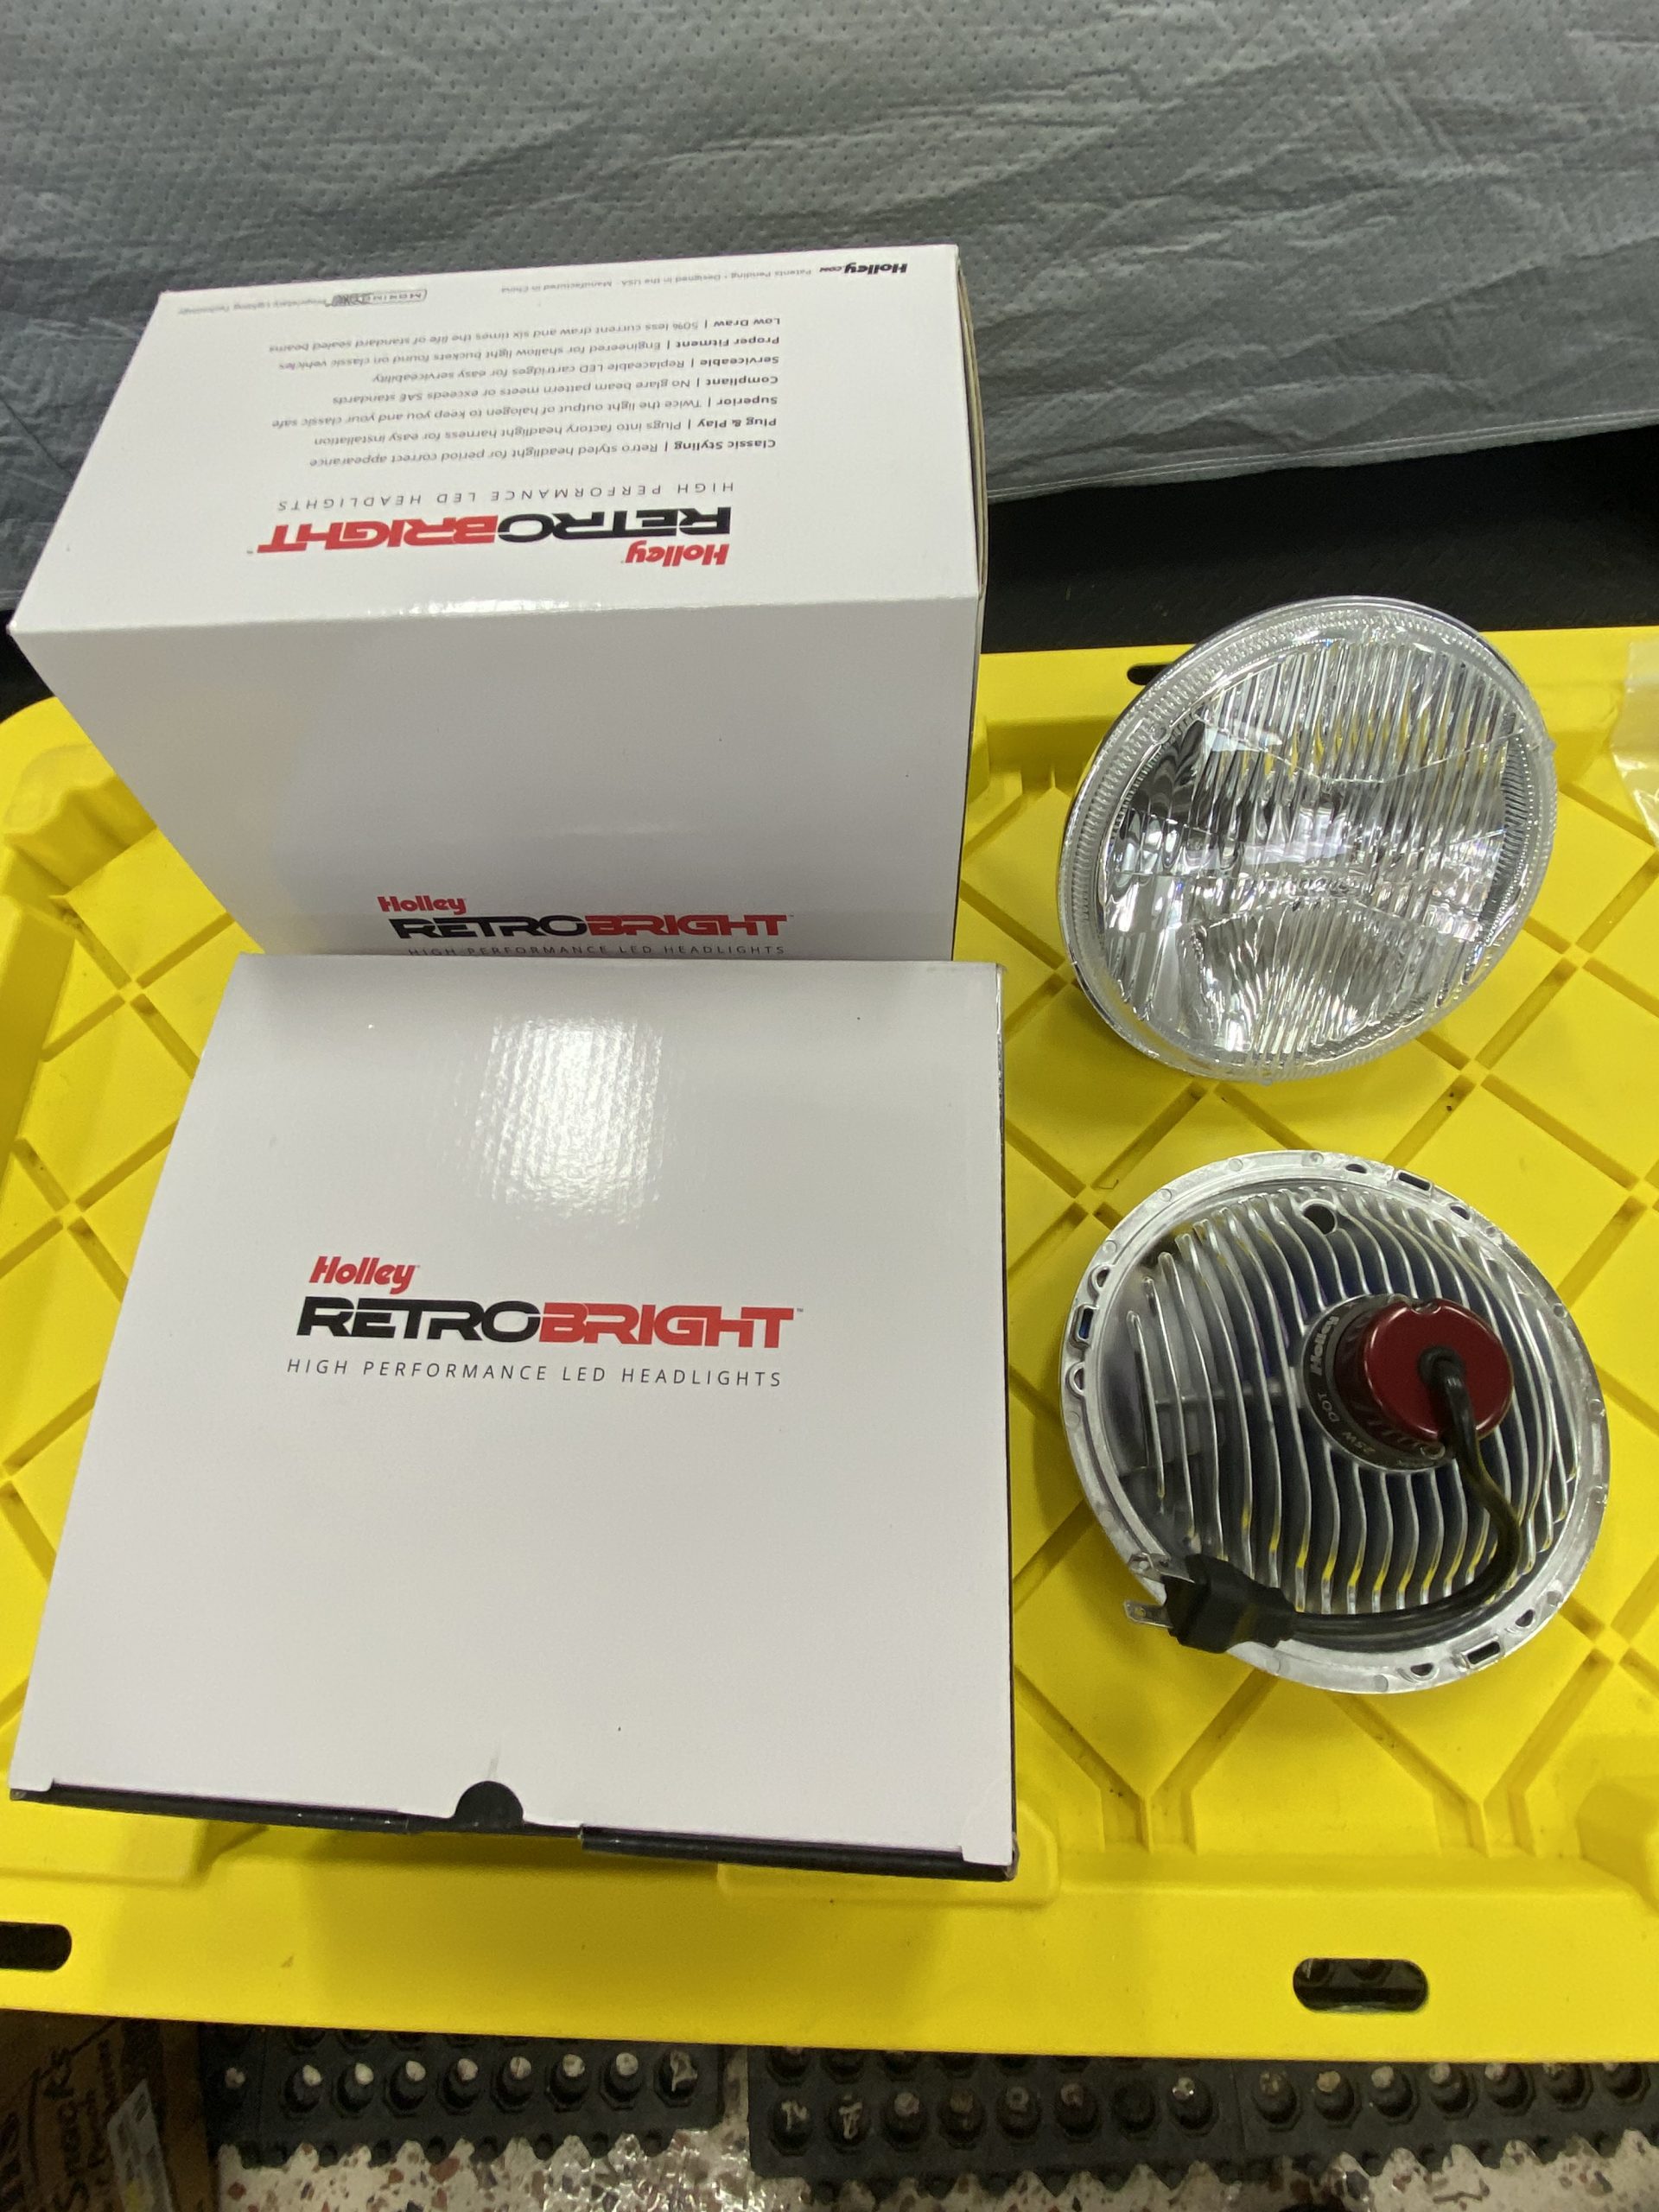 Holley RetroBright LED 7″ Headlights new in boxes